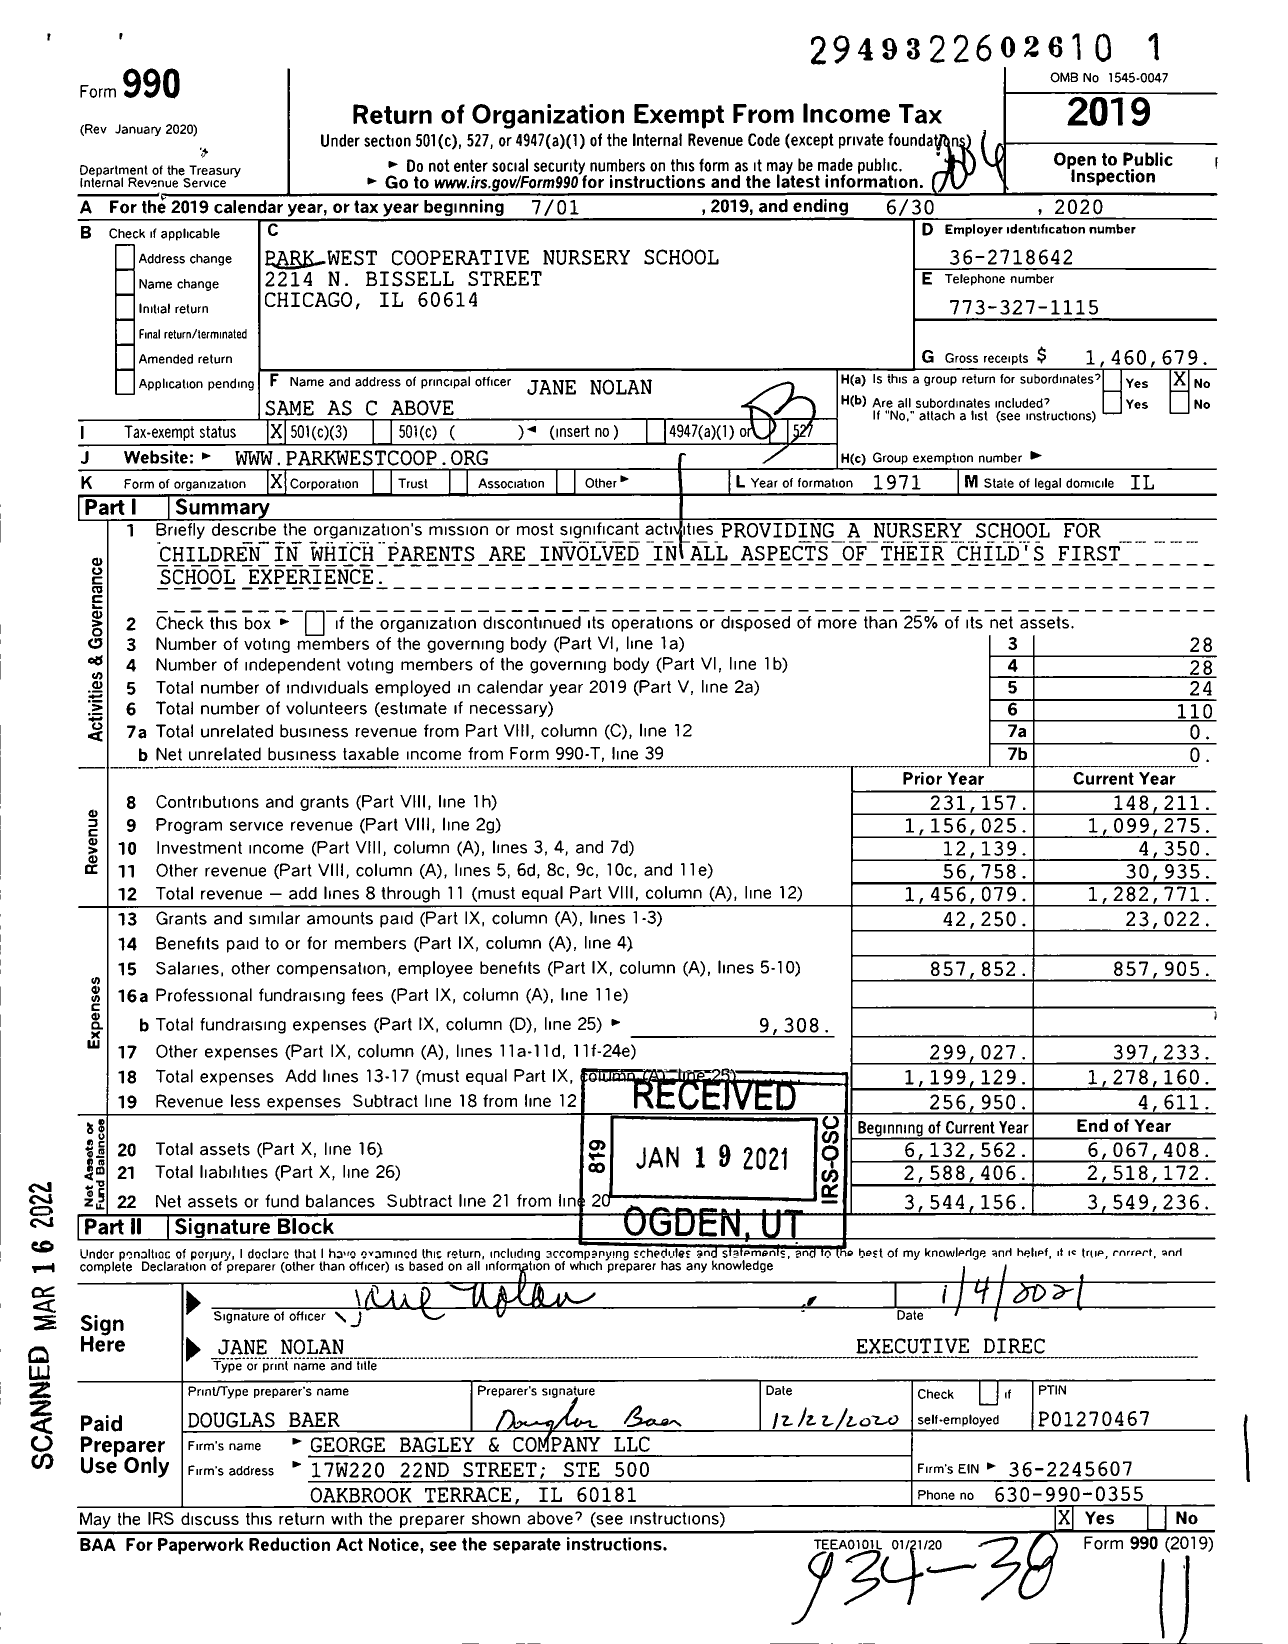 Image of first page of 2019 Form 990 for Park West Cooperative Nursery School